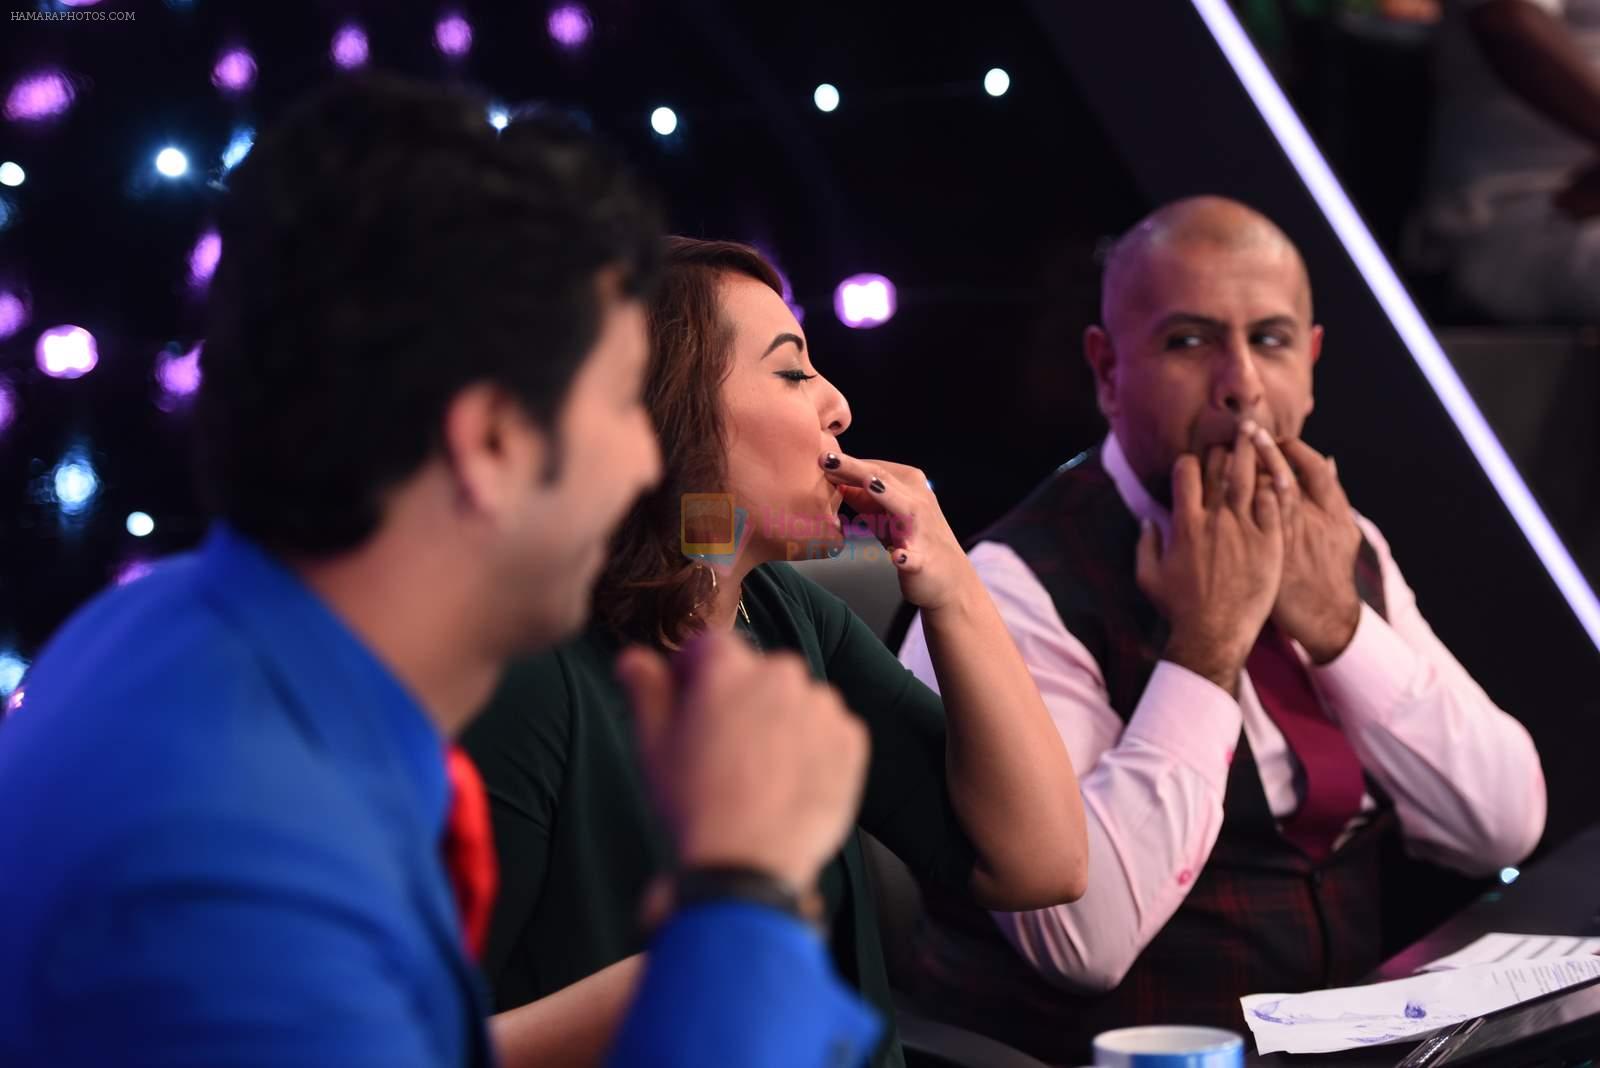 Sonakshi Sinha on the sets of Indian Idol Jr in Mumbai on 25th June 2015